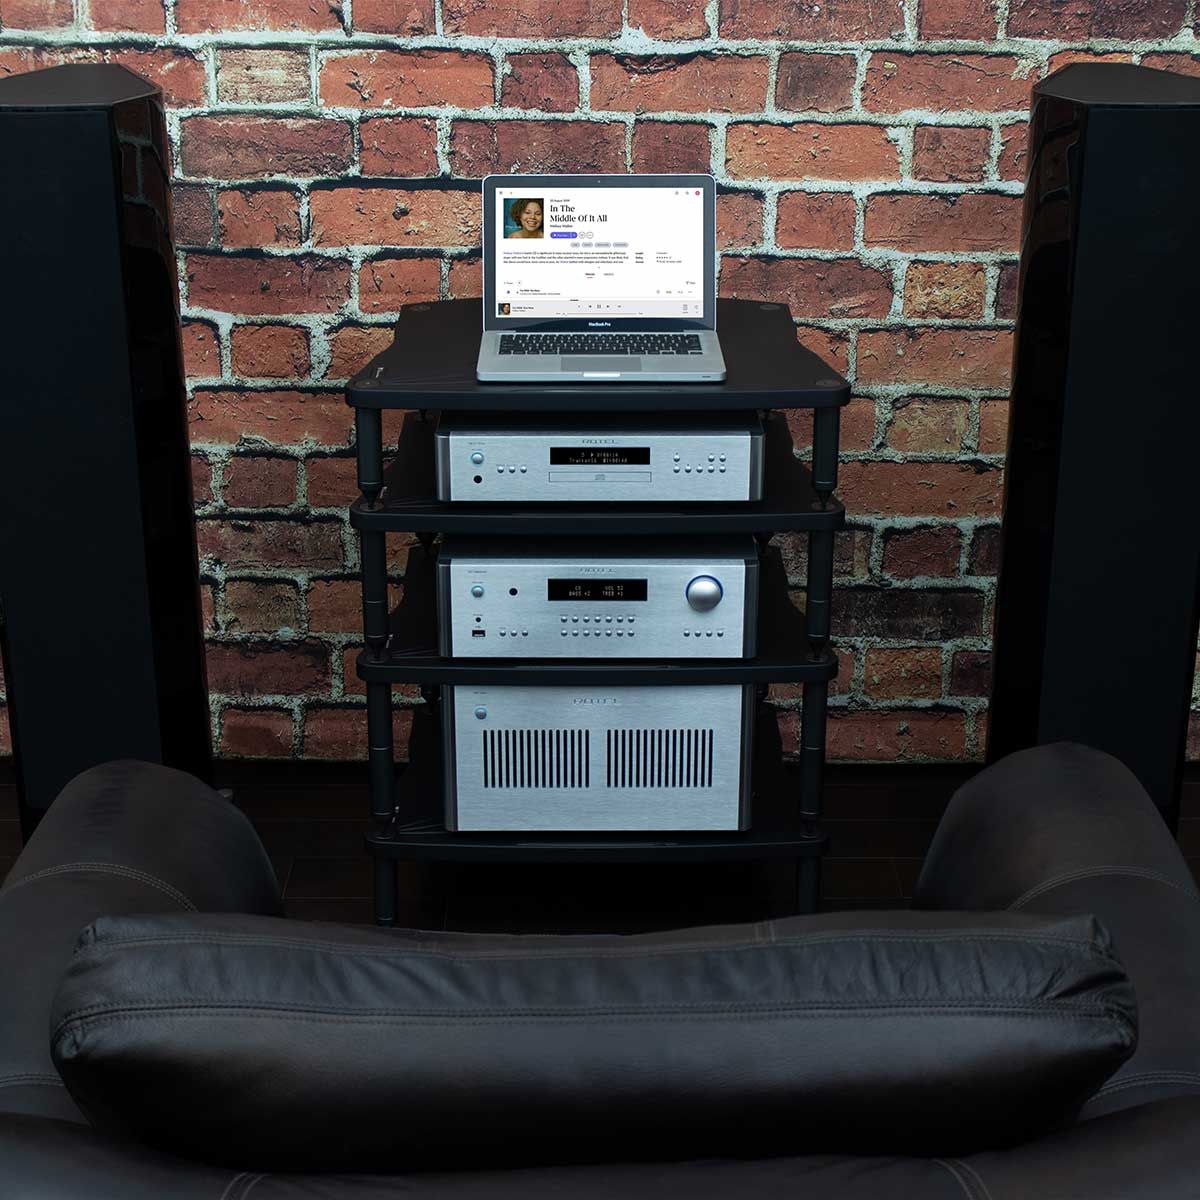 Rotel RC-1590 MKII Stereo Preamplifier, Silver, set up in an audio rack between two tower speakers